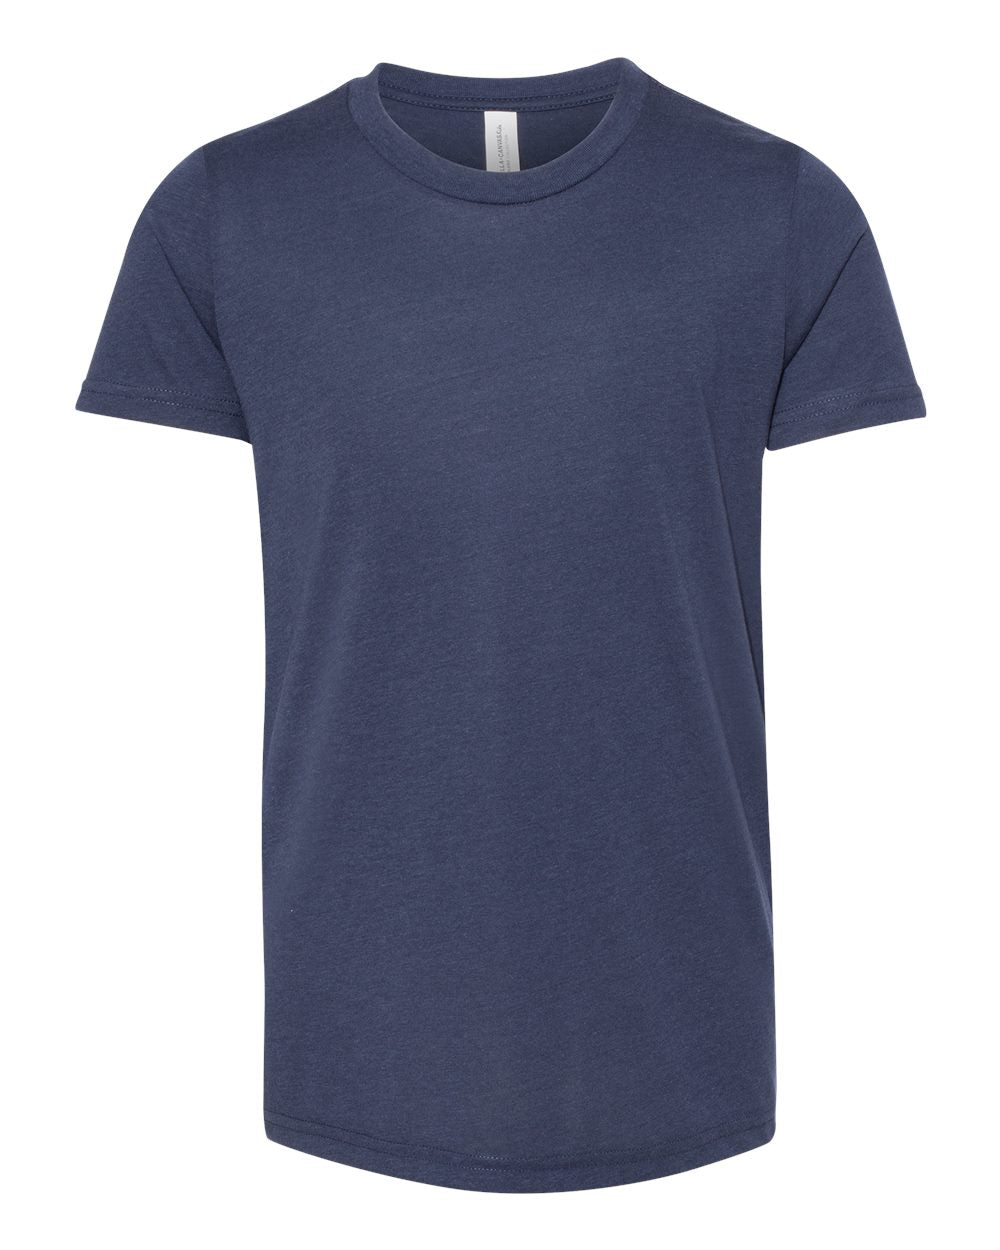 Bella + Canvas Youth Triblend Tee (3413y) in Solid Navy Triblend